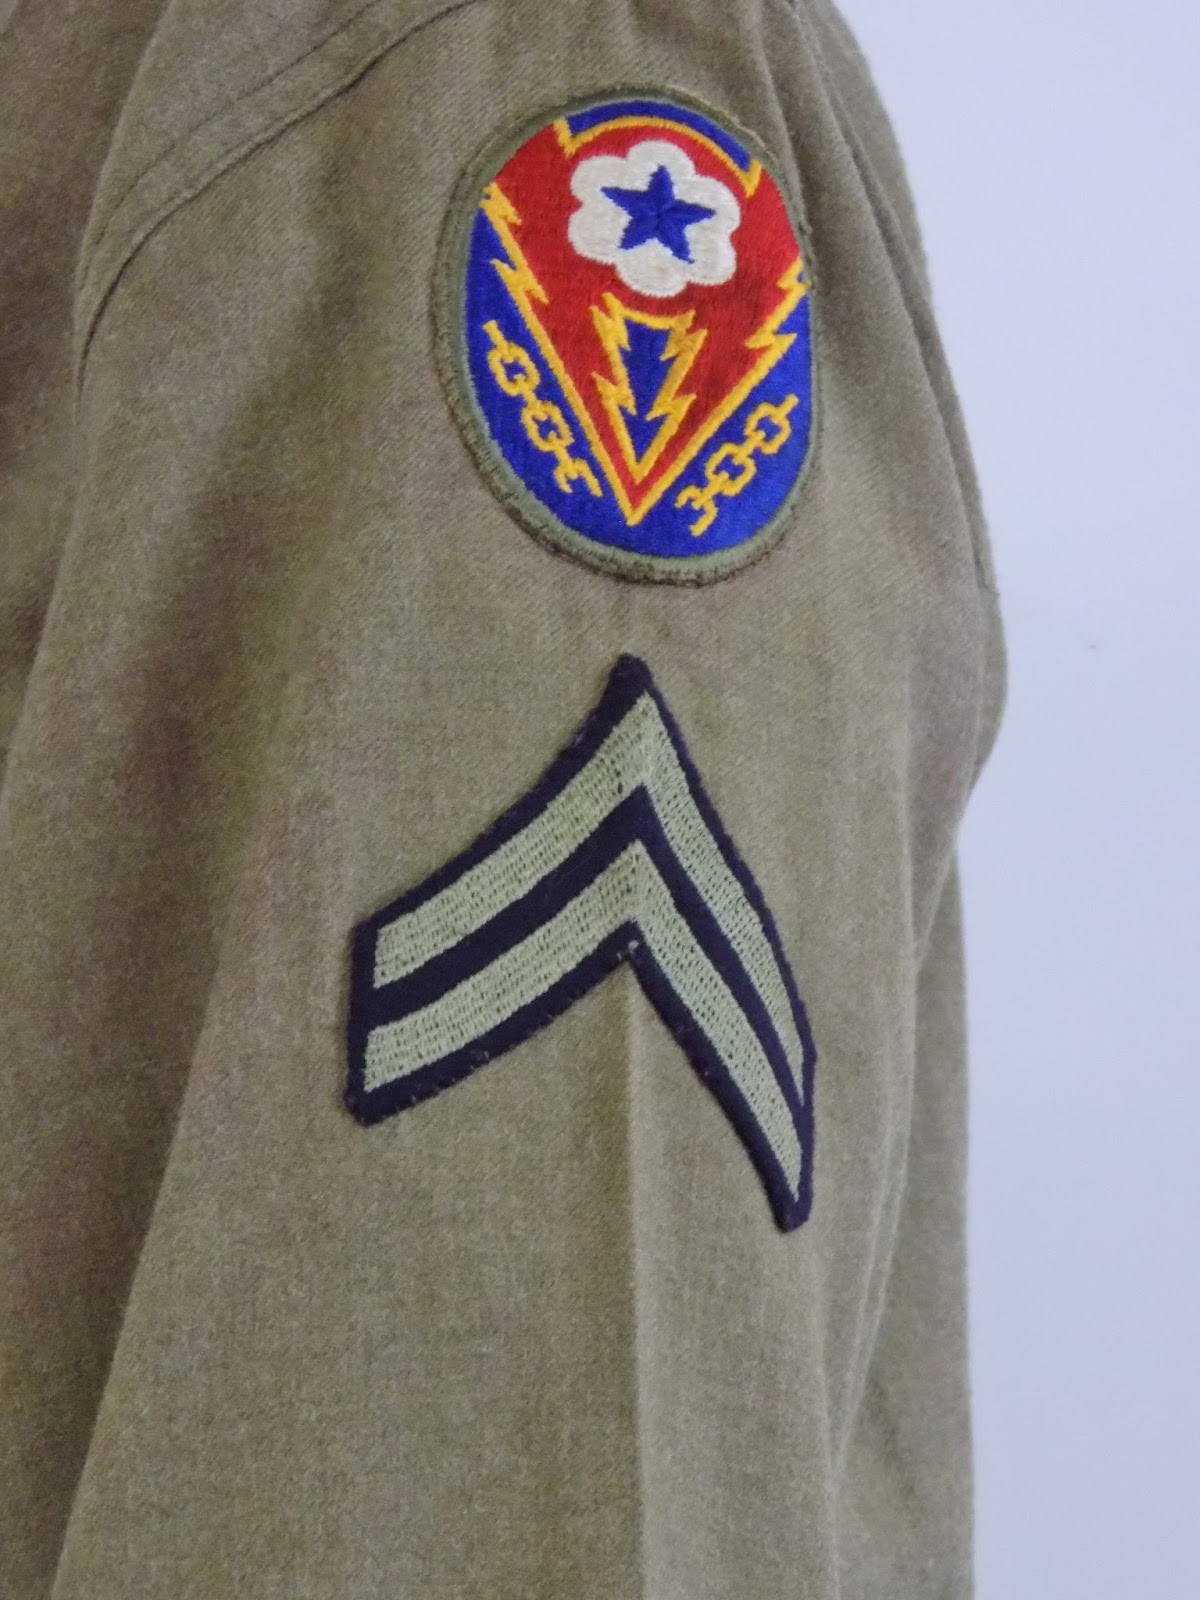 Lawrence Lore: Corp US Army uniform with ADSEC and 1st Inf Patches